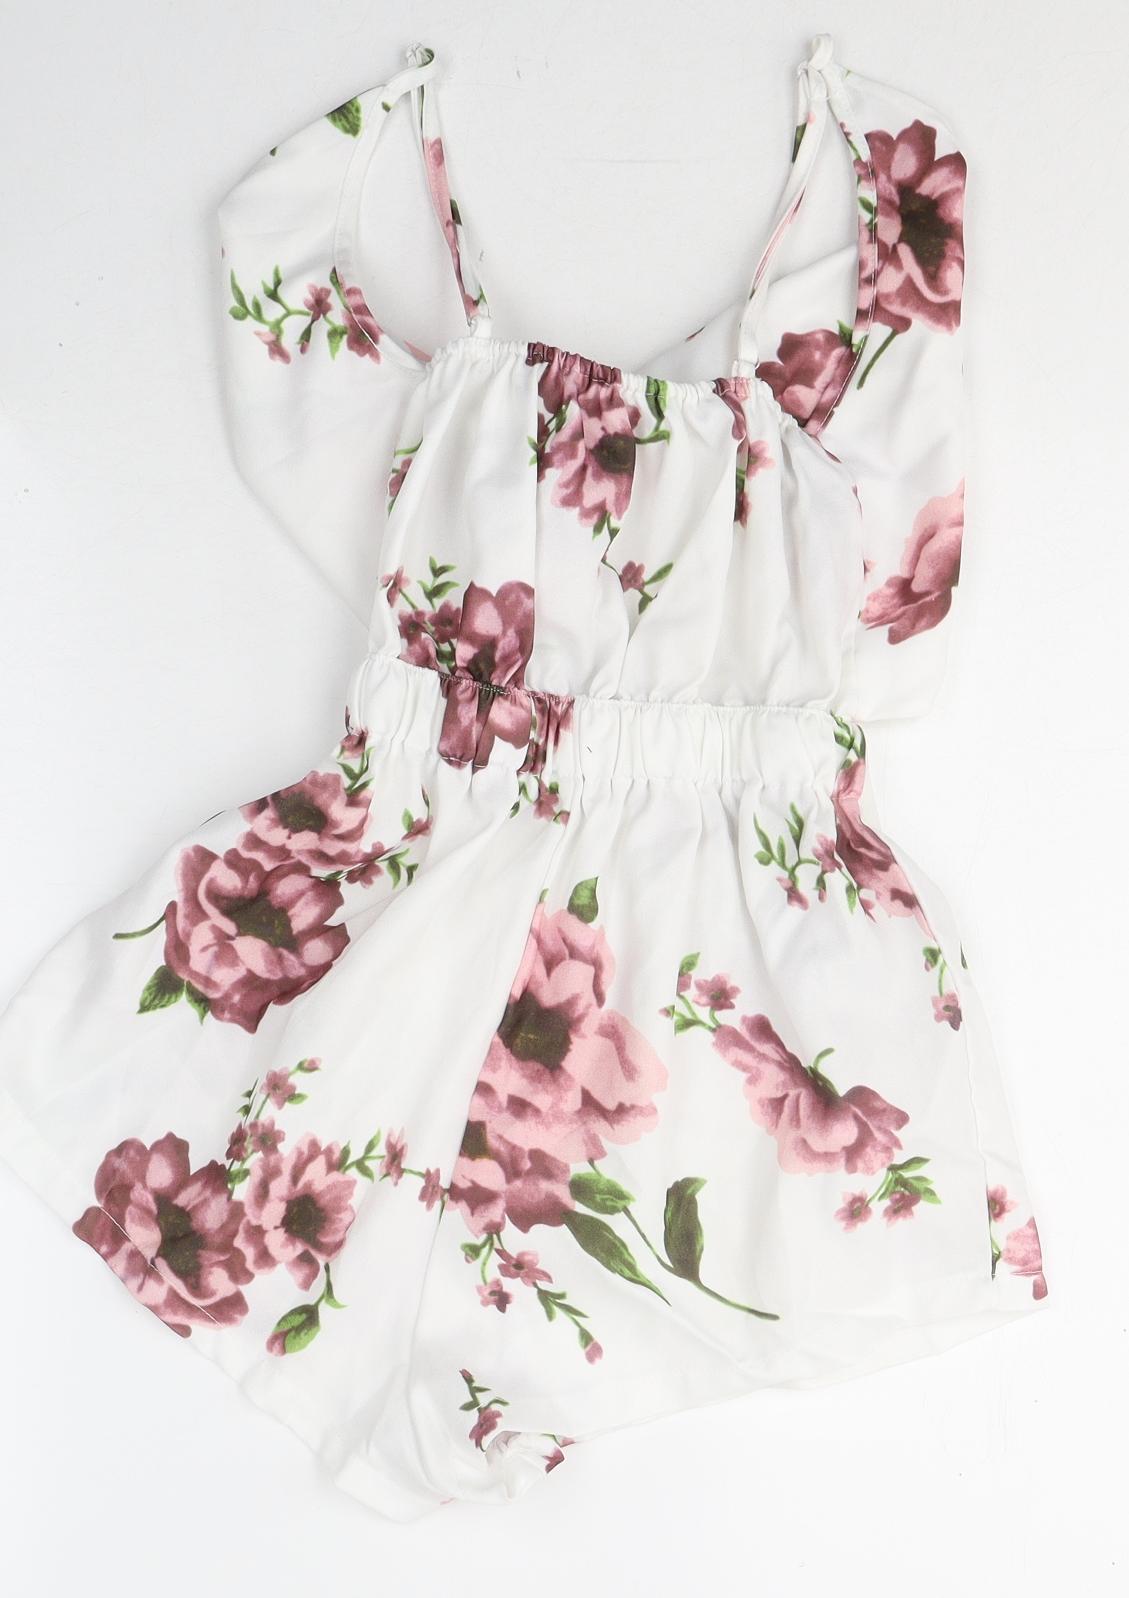 Zaful Womens White Floral Polyester Playsuit One-Piece Size XS  Tie